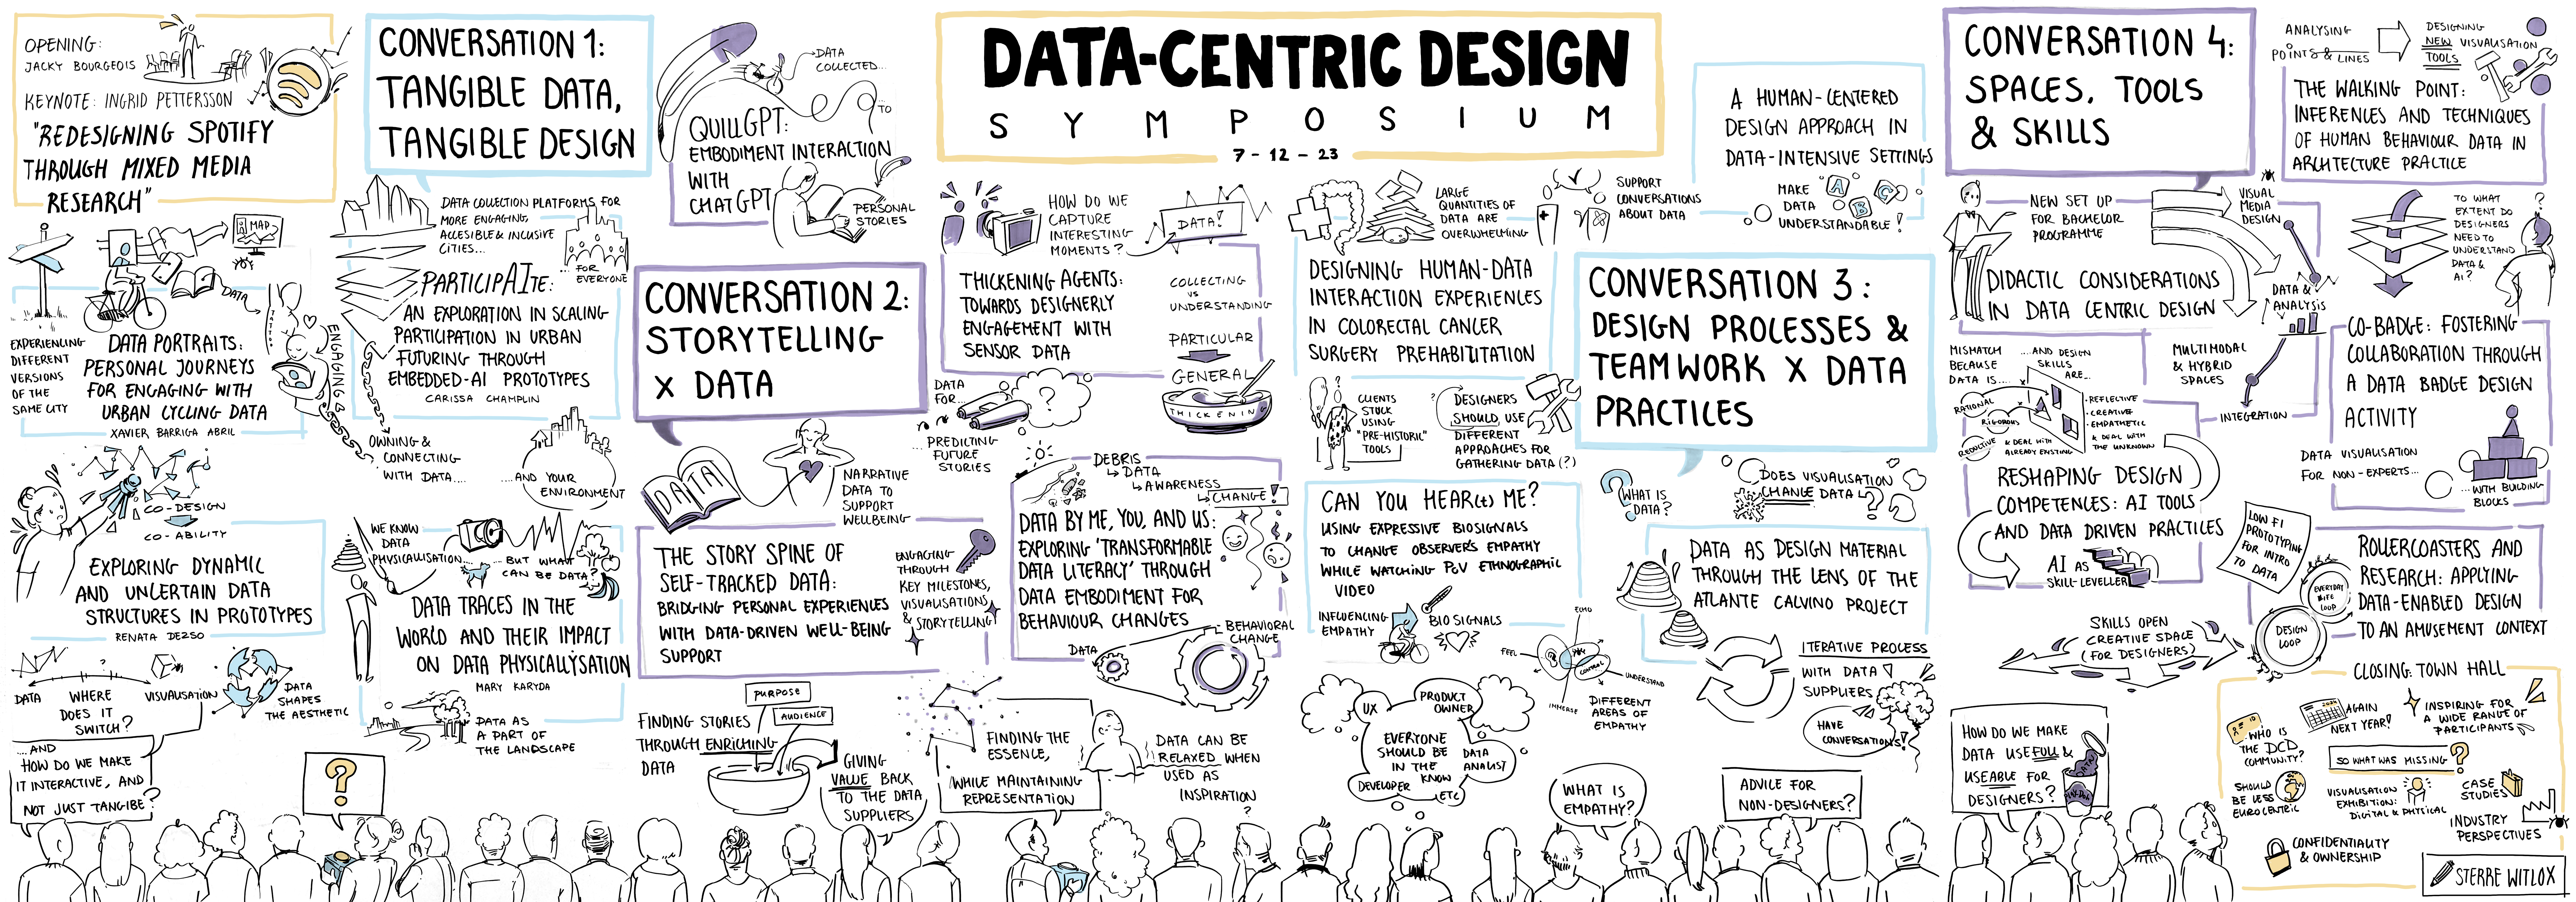 Data-Centric Design Symposium - Visual Notes by Sterre Wiltox